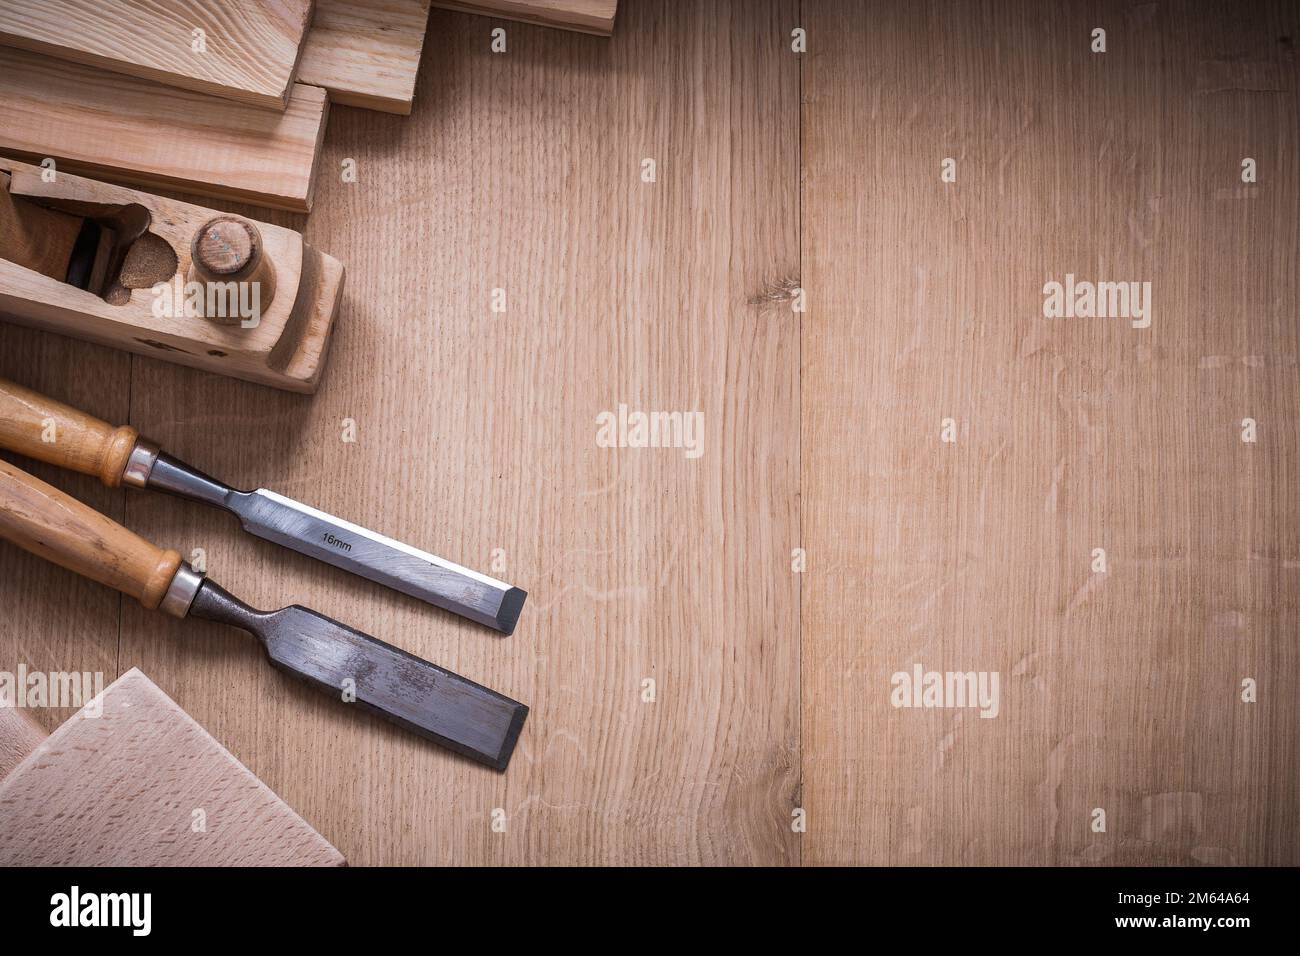 Variation of wooden joiner’s working tools on wood board copy space image construction concept. Stock Photo